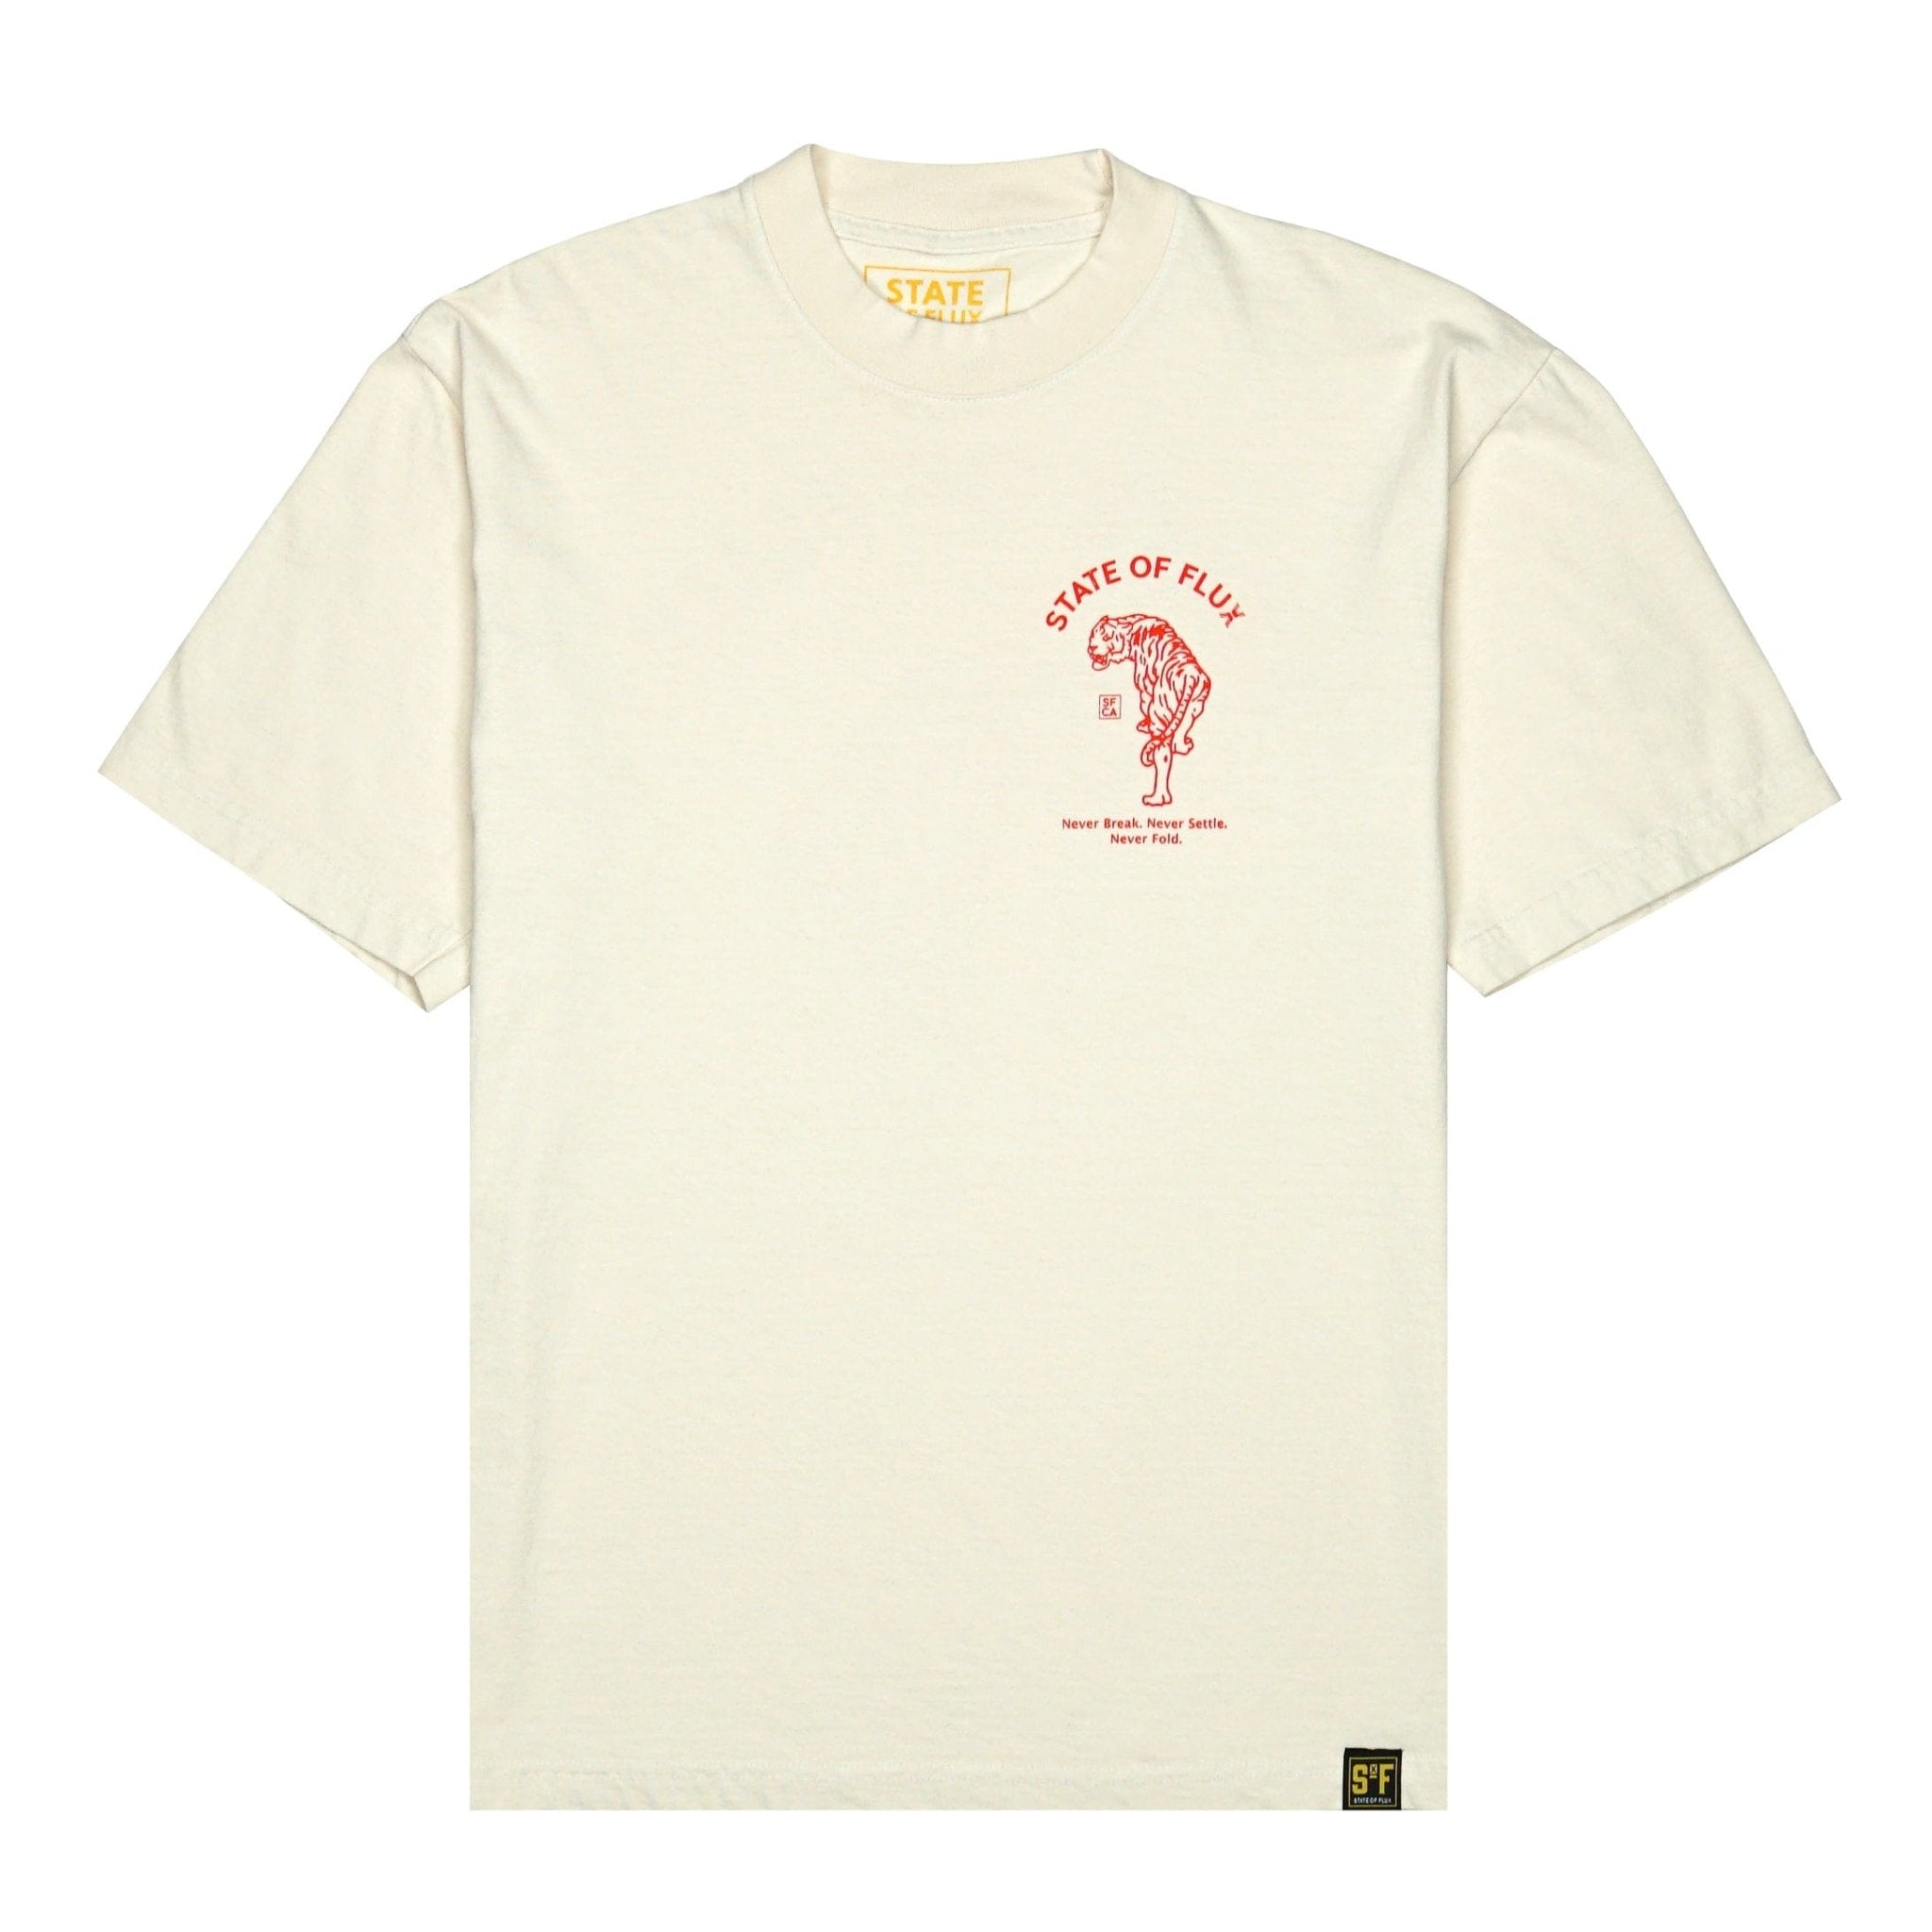 Prowler Tee in cream and red - State Of Flux - State Of Flux